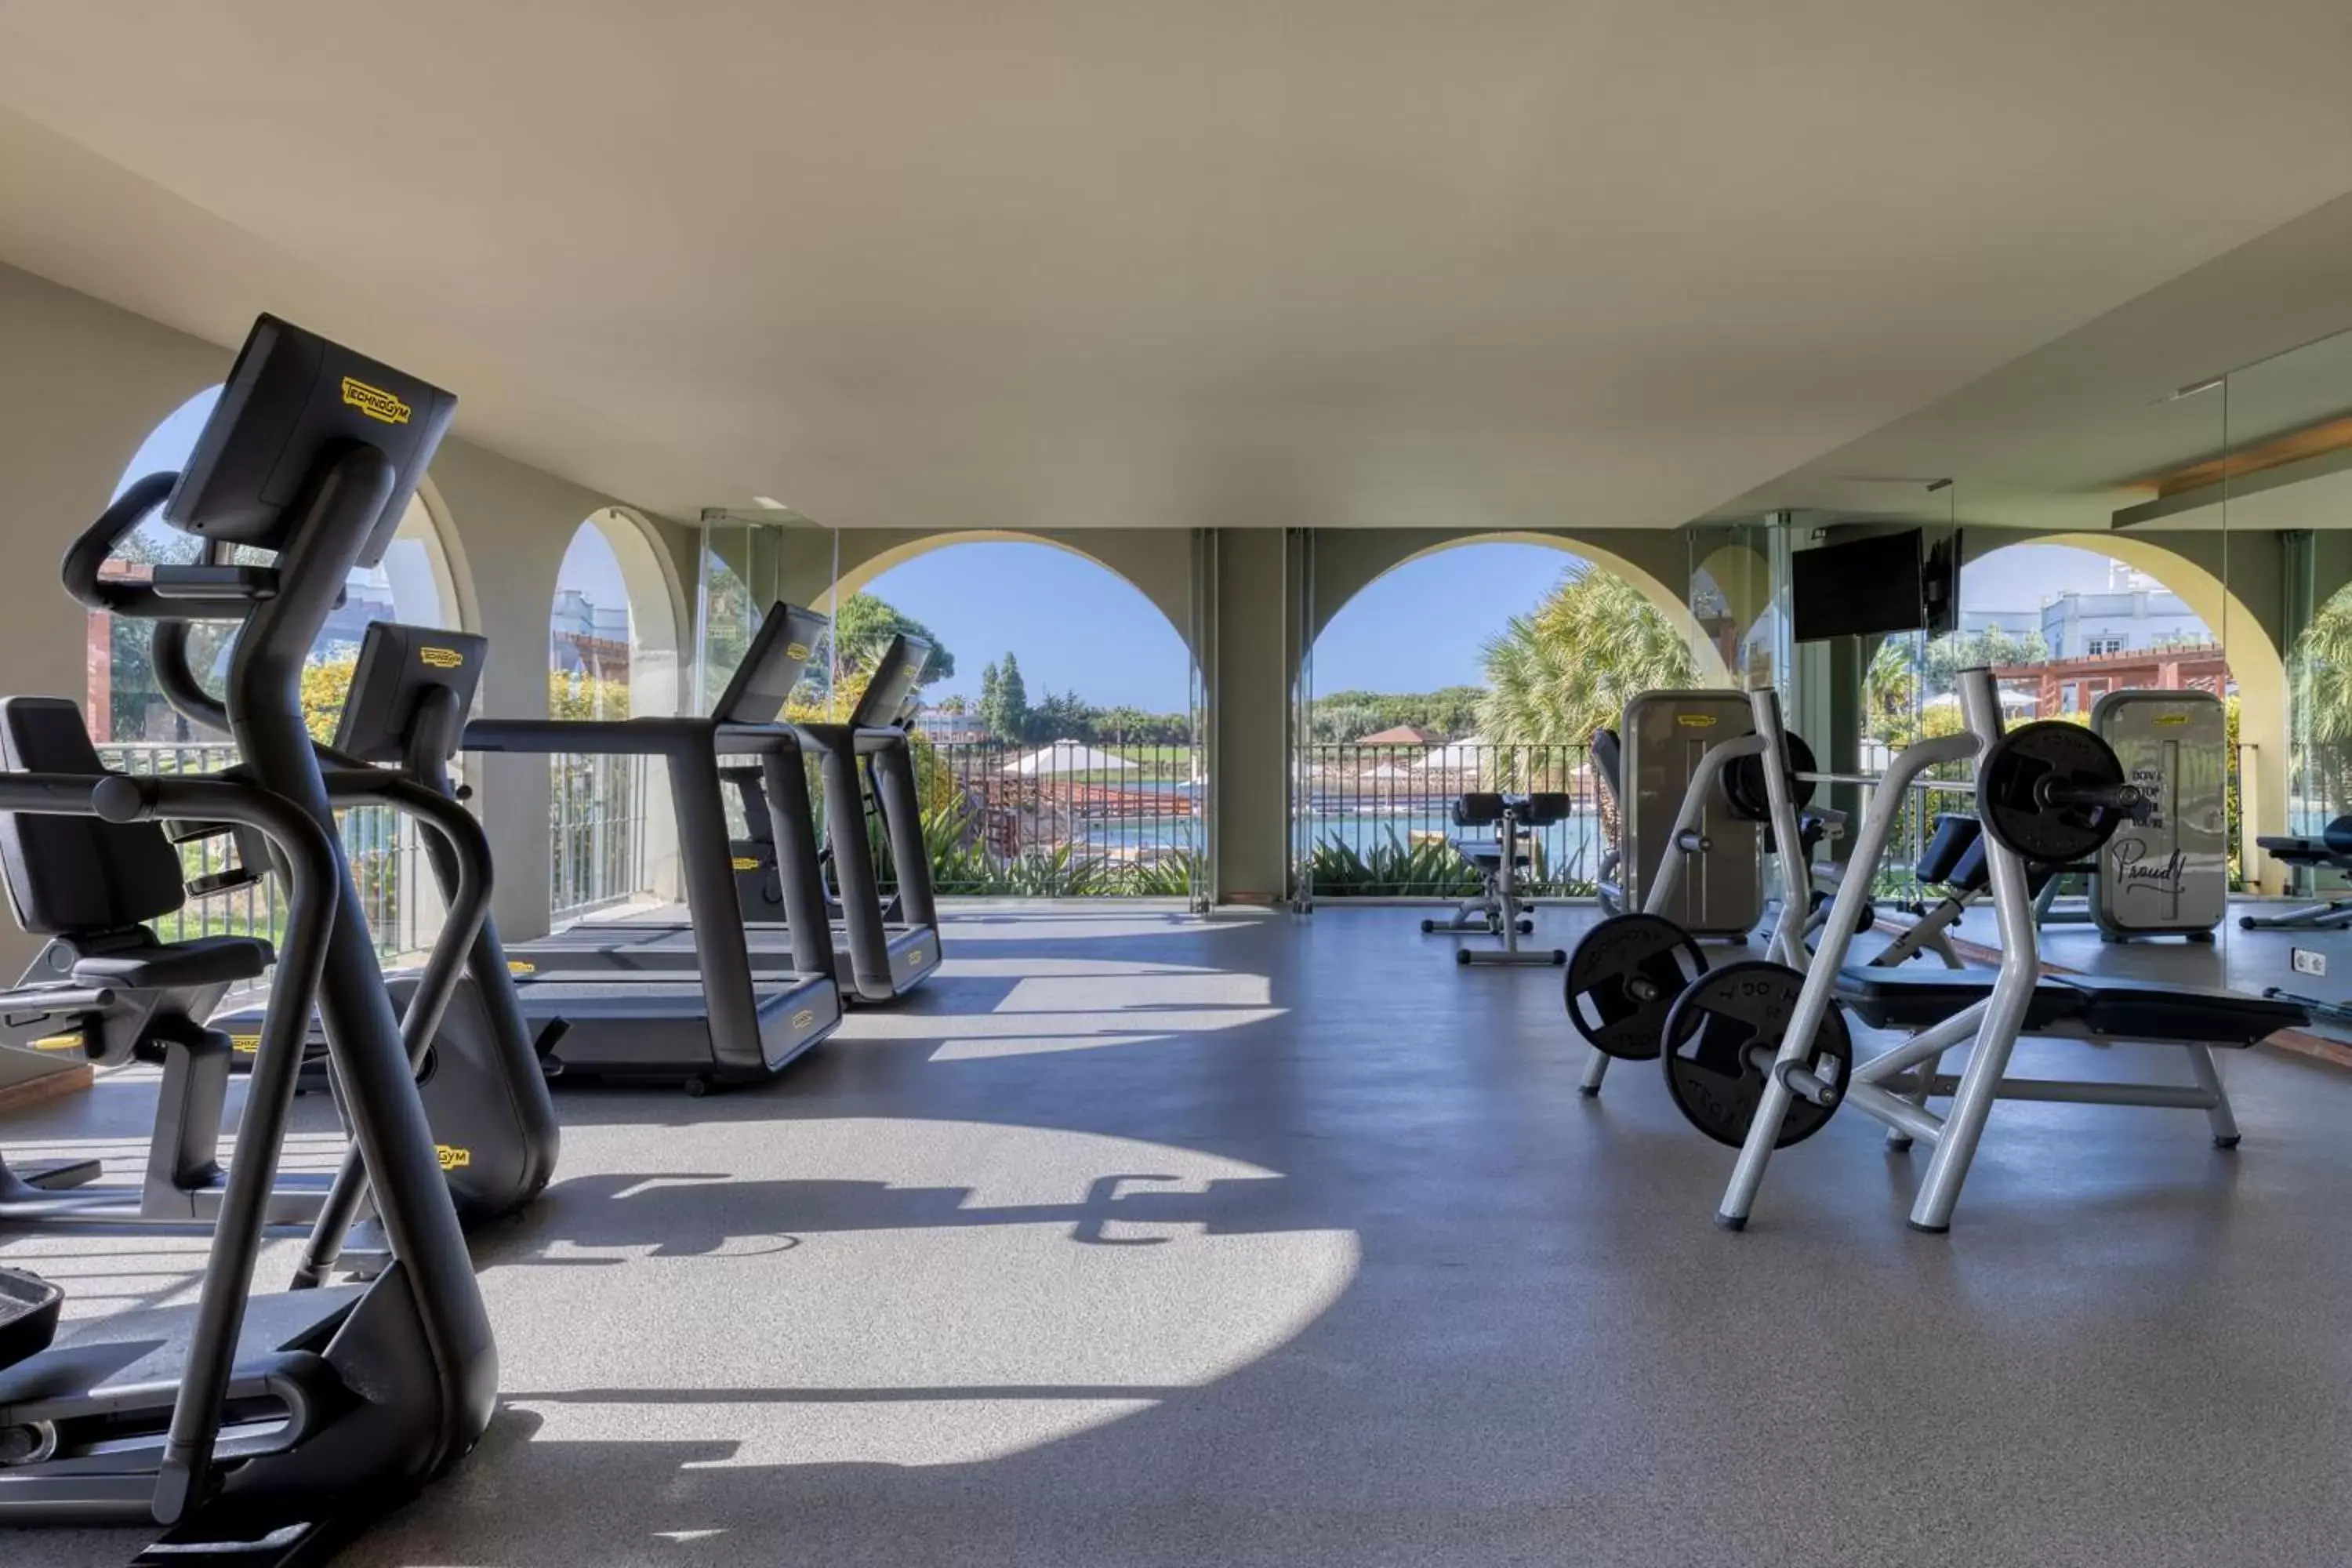 Fitness centre/facilities, Fitness Center/Facilities in Domes Lake Algarve, Autograph Collection